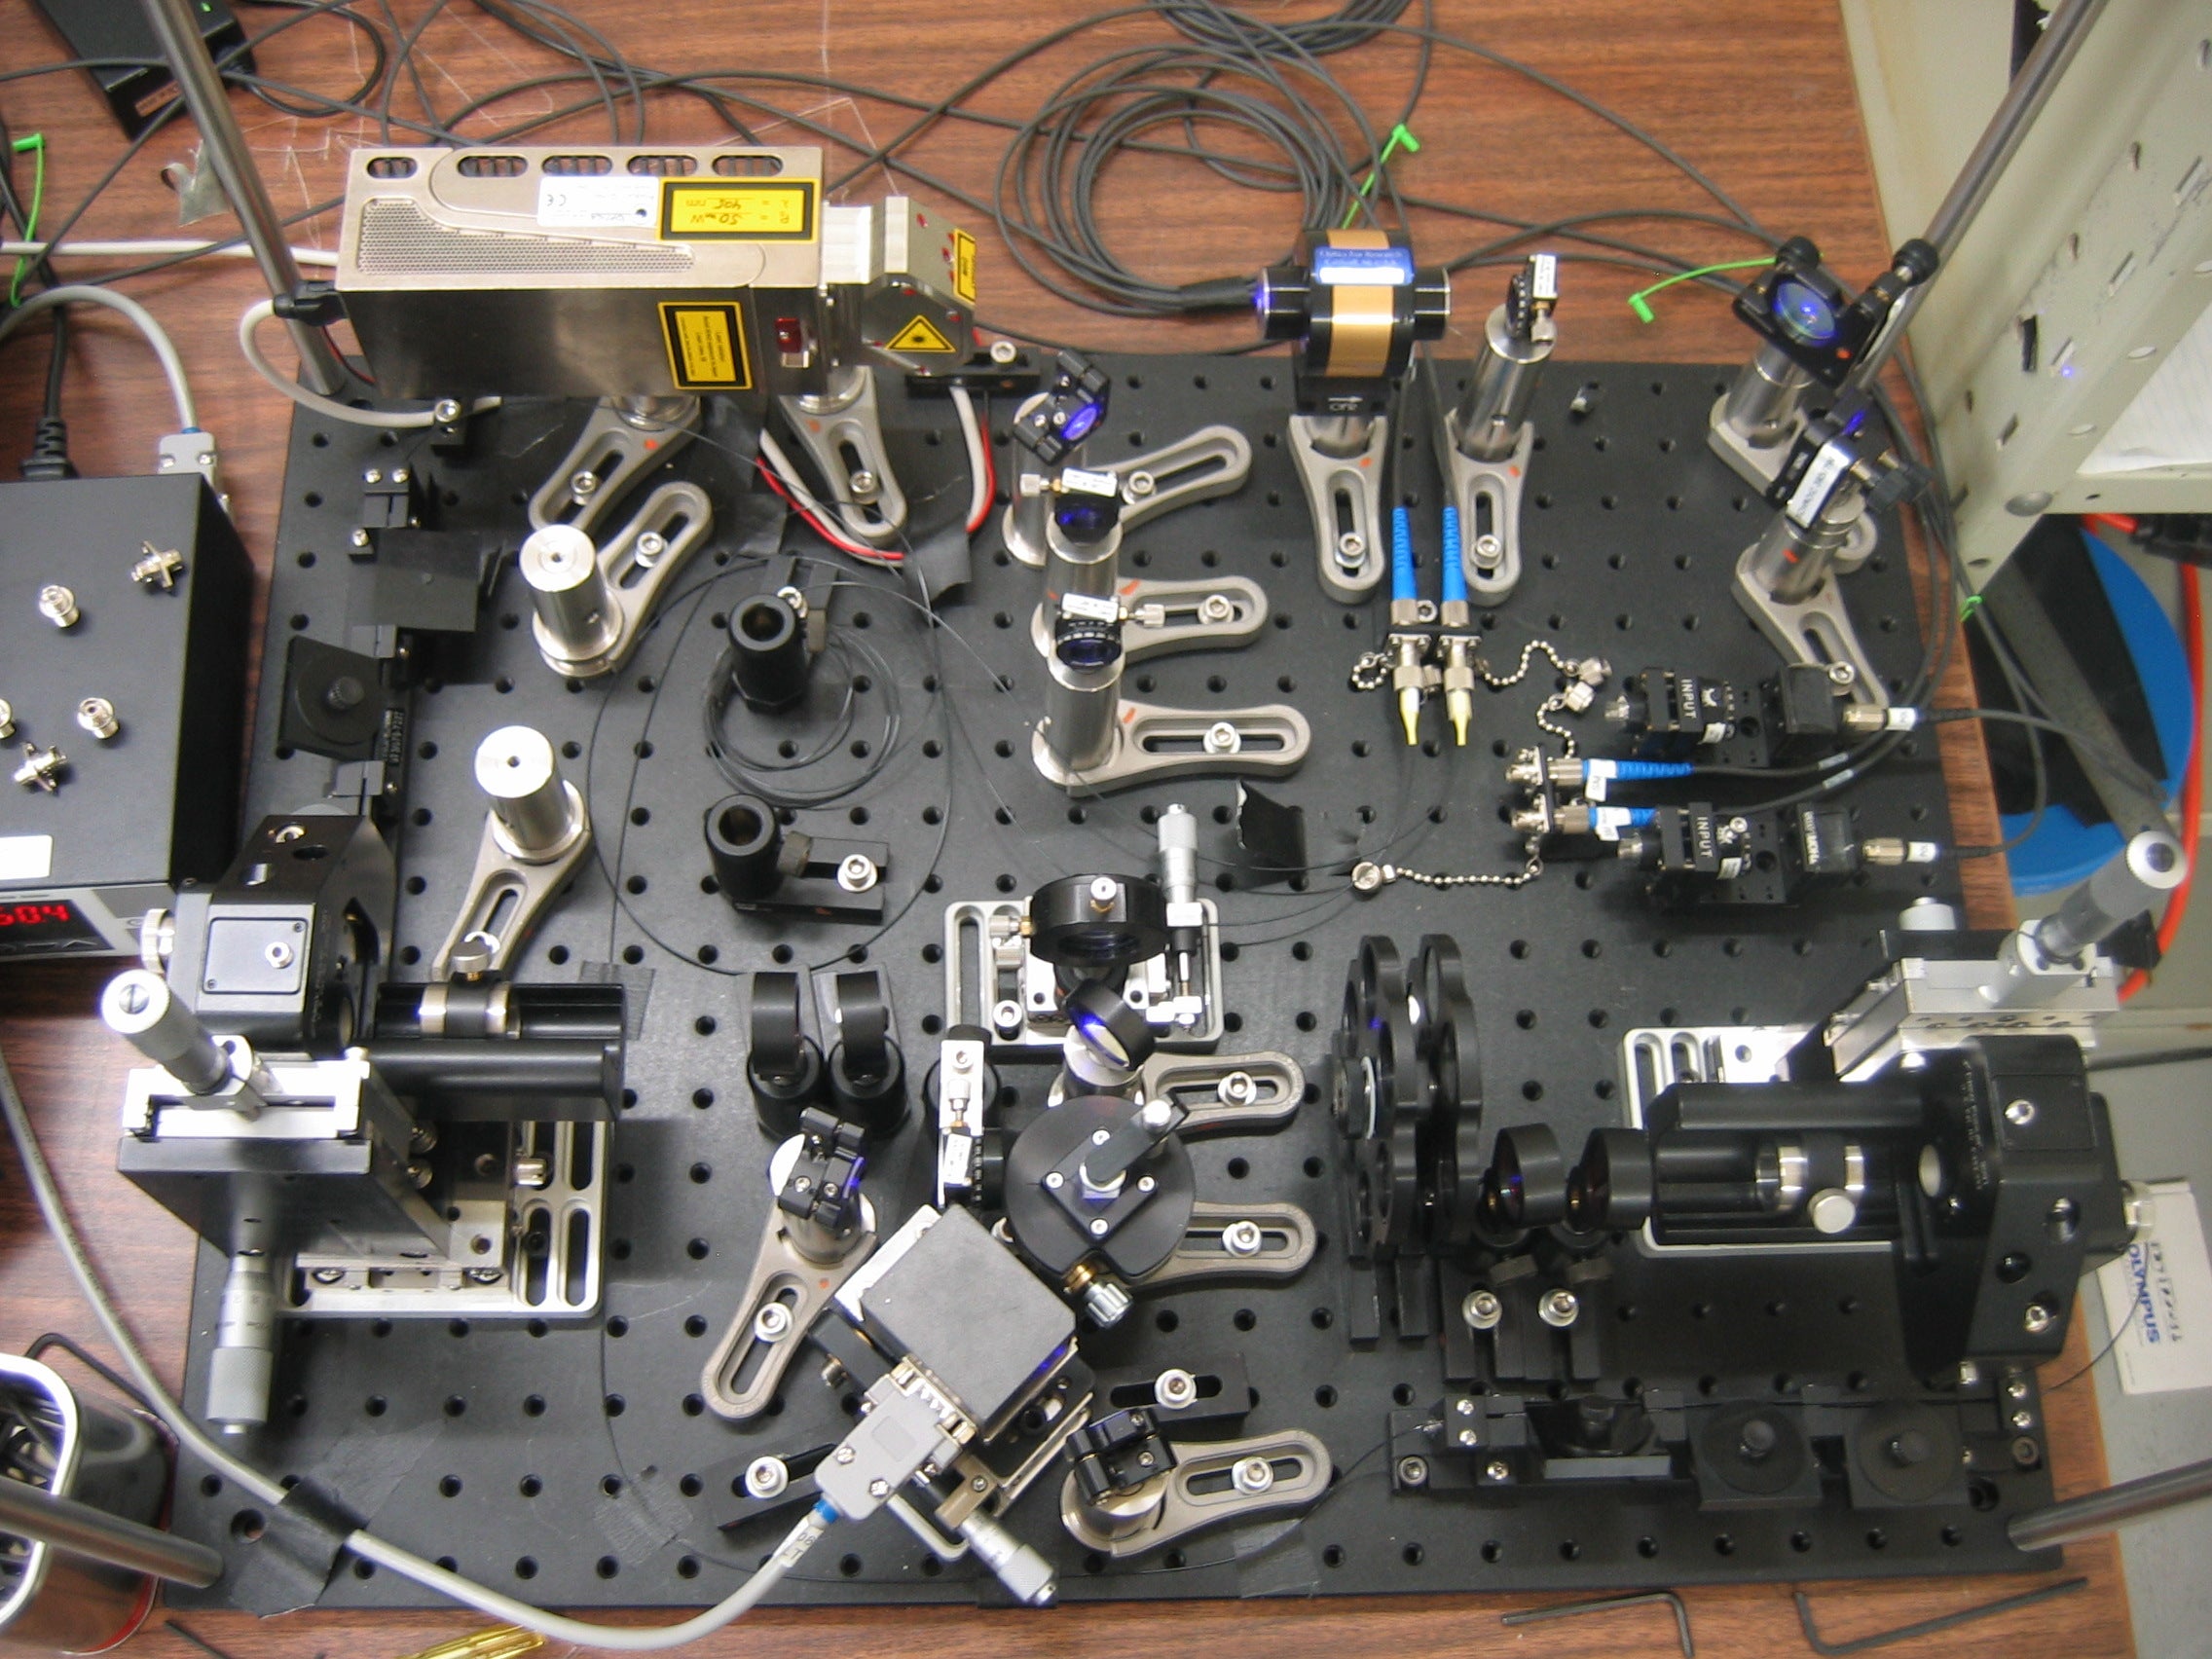 Experimental apparatus to produce entangled photons.